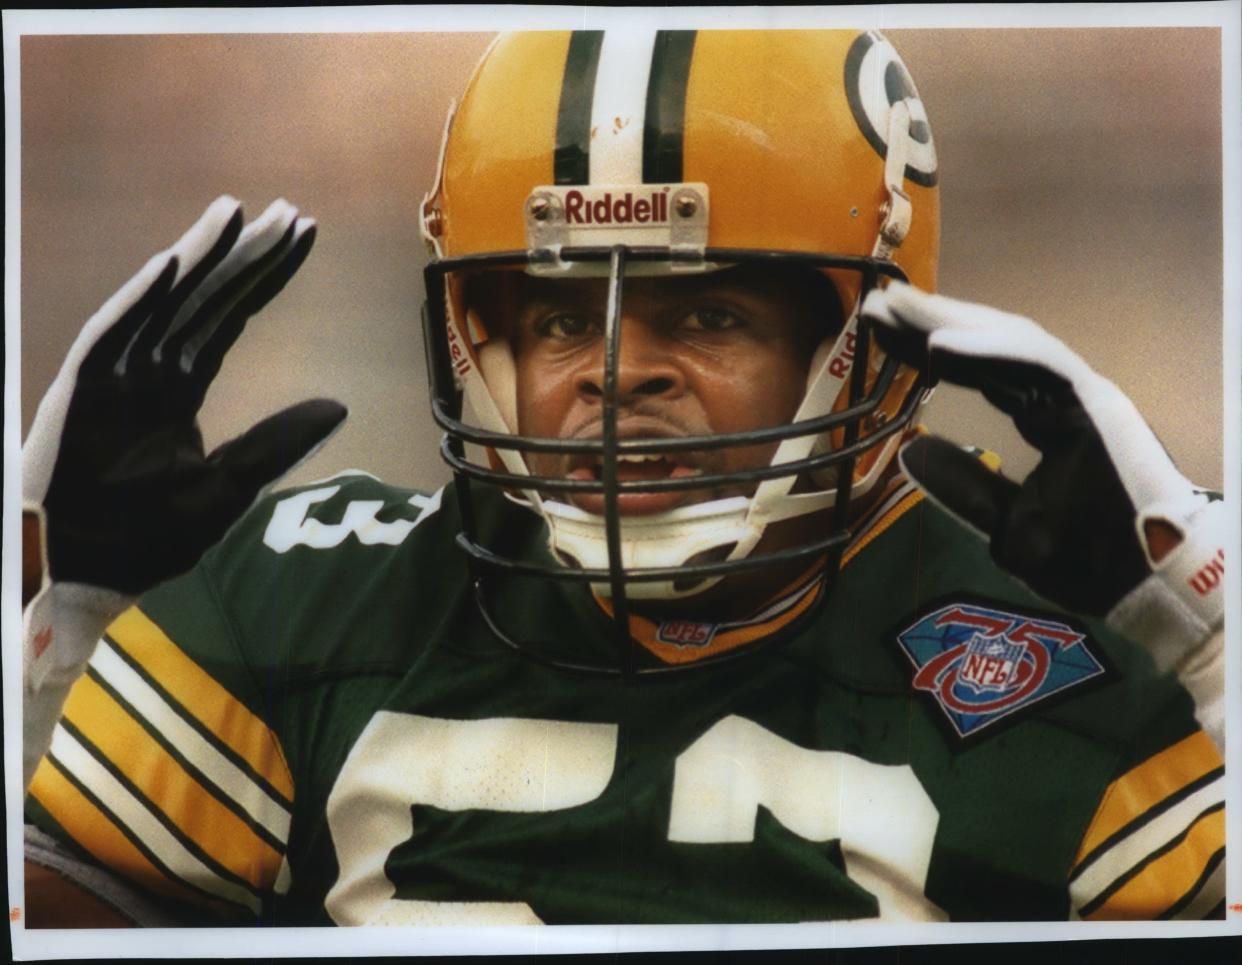 Green Bay Packers linebacker George Koonce was a starter on the franchise's Super Bowl-winning team after the 1996 season.